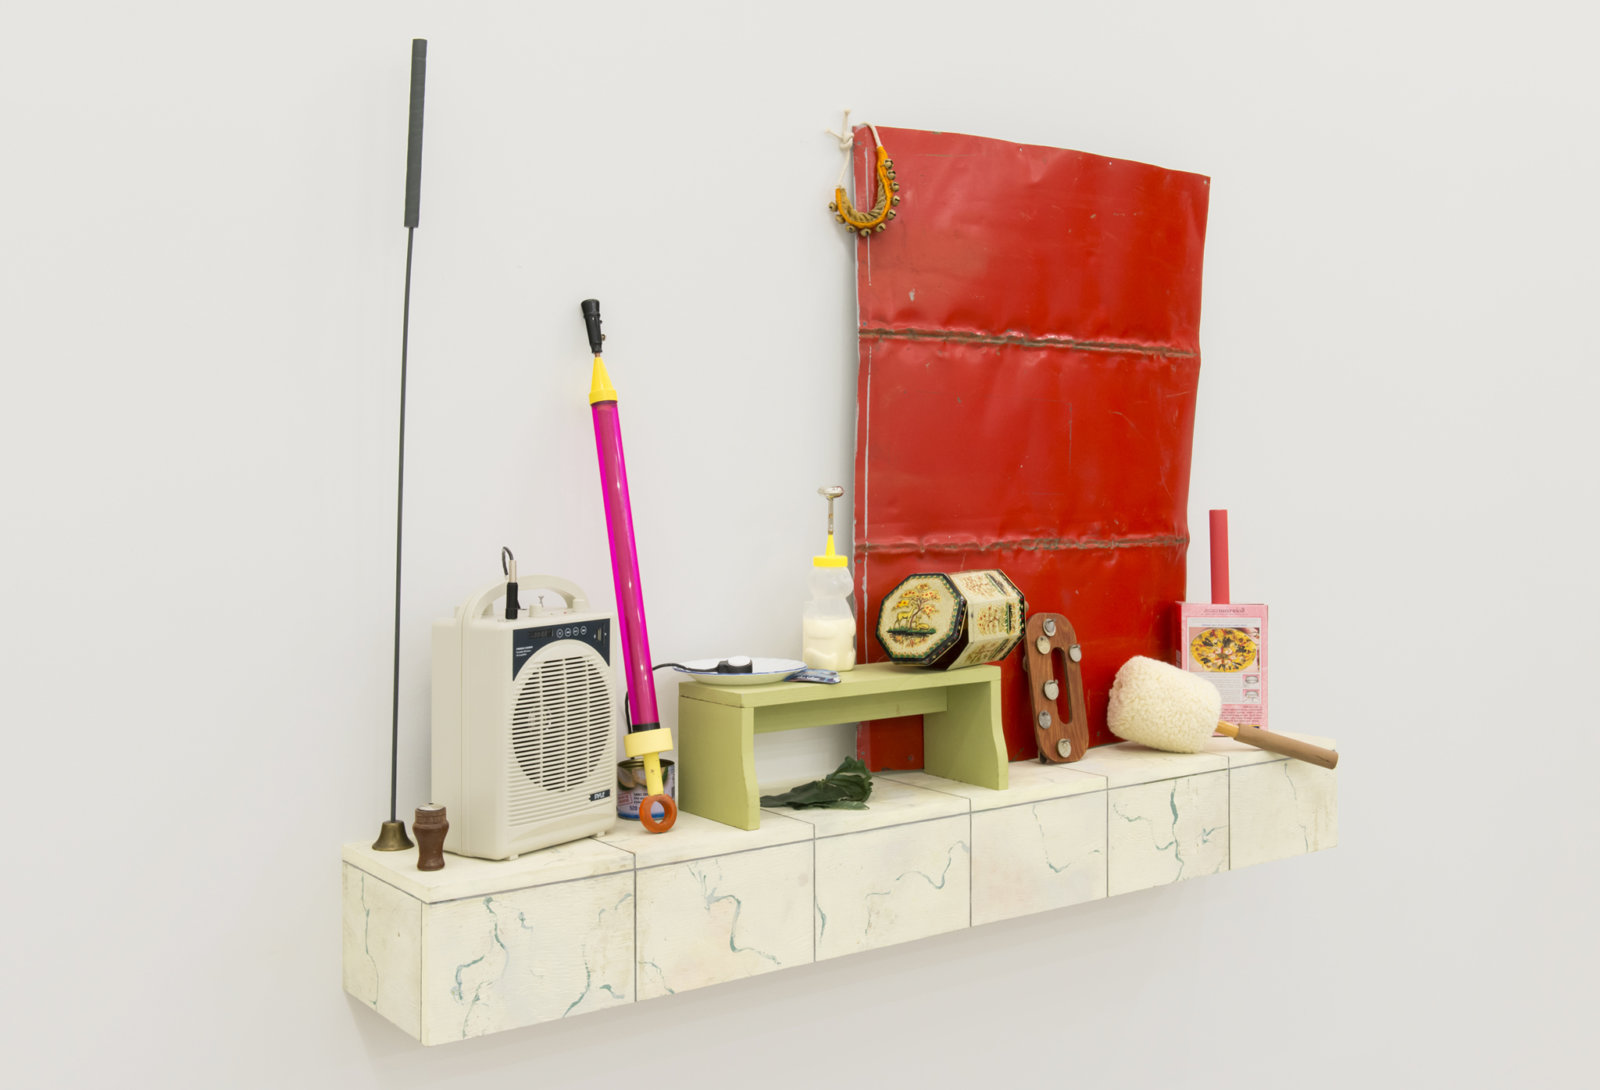 Ashes Withyman, Altar, River, Compass, Cetus, Musca, Furnas, Cup, 2017–2018, portable speaker, mallet, steel, currency, wood, honey pot with glue, animal calls, bells, plastic leaves, pallia rattle, contact microphone with stomach antacid, plate, bell, painted plywood, 39 x 55 x 12 in. (99 x 138 x 31 cm)